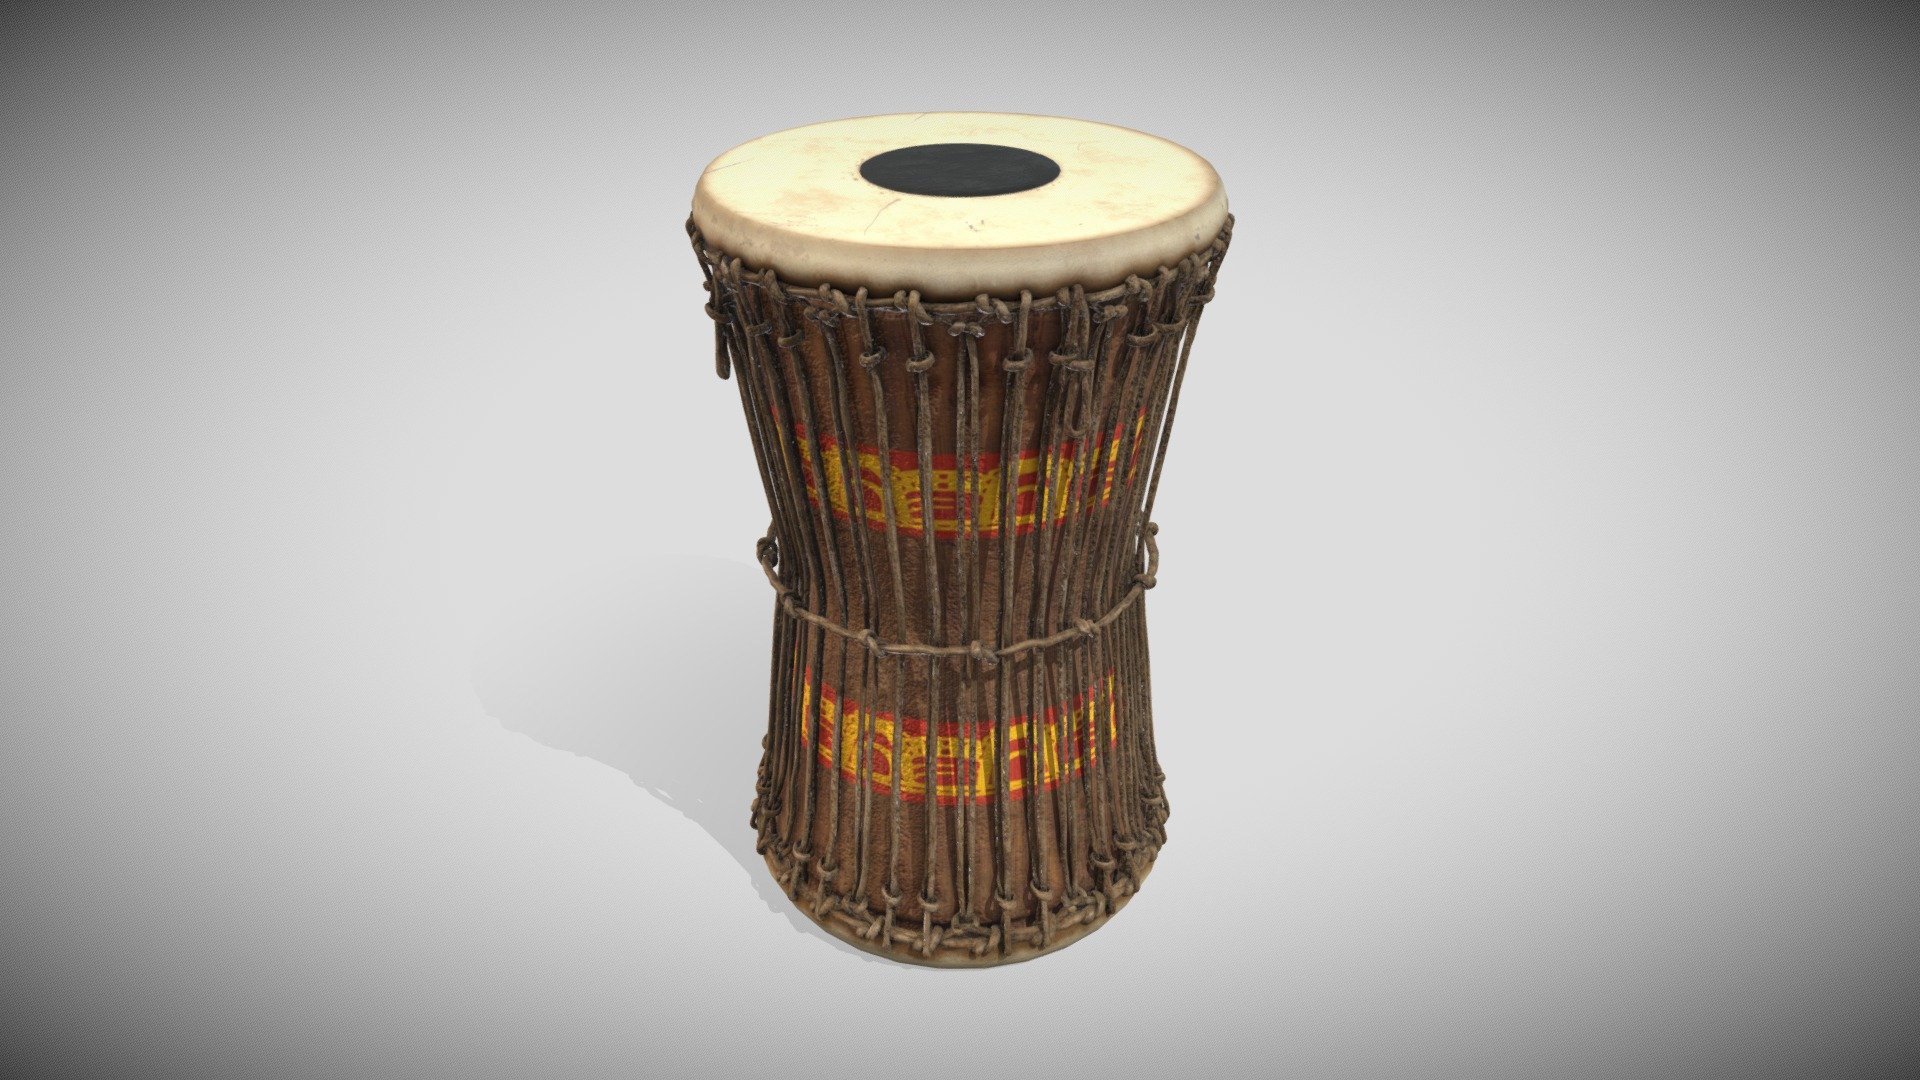 One Material PBR Metalness 4k

All Quads - Drum - Drummy - Buy Royalty Free 3D model by Francesco Coldesina (@topfrank2013) 3d model